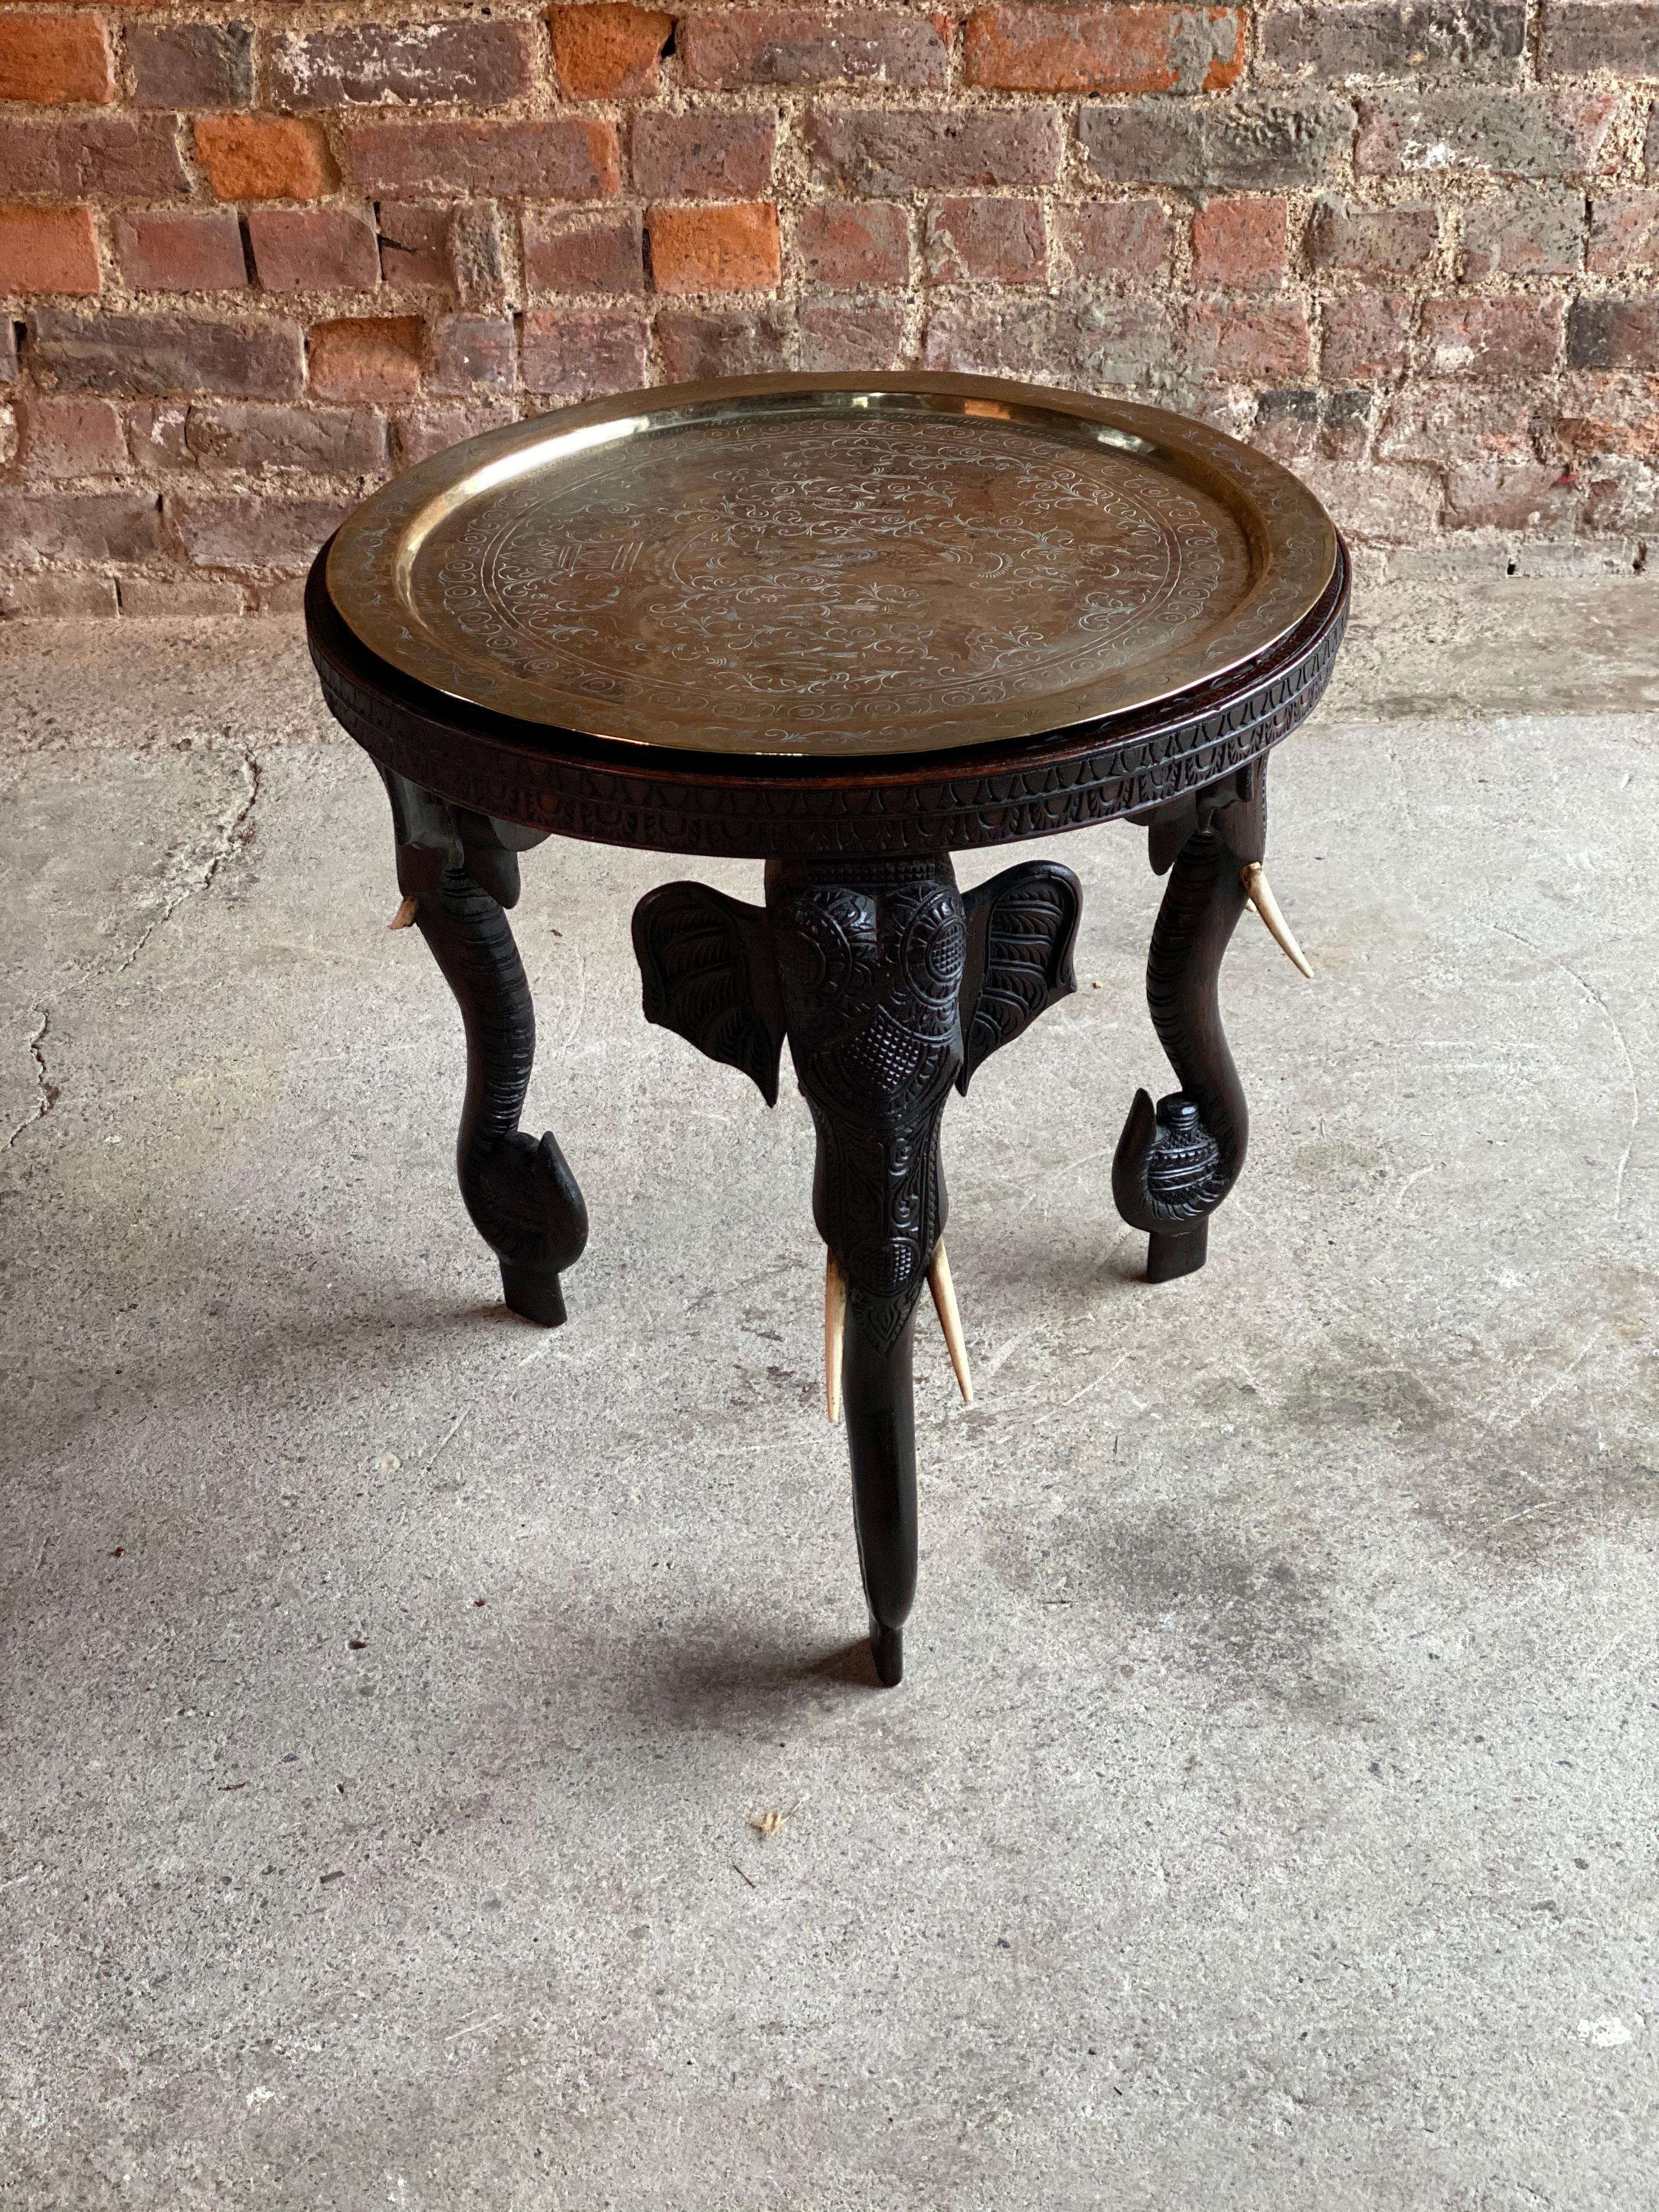 Antique 19th century Anglo-Indian Elephant side table circa 1890, the heavily carved top comes with a circular embossed and engraved brass tray, the table with three elephant legs, the profusely carved top with a central Indian Goddess flanked by